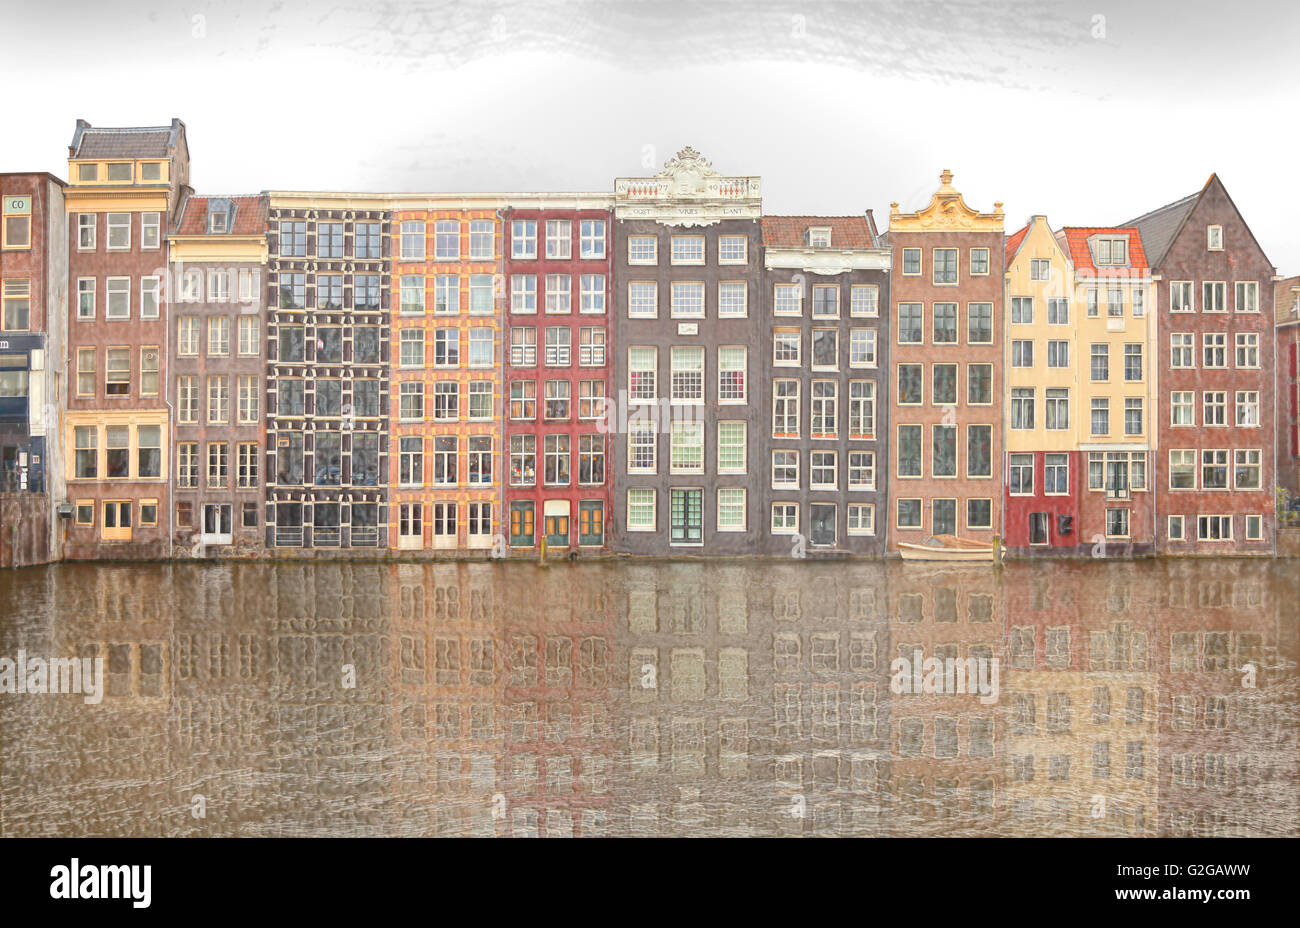 Amsterdam architecture, view from the Damrak looking East, The dancing canal or grachtenhuizen, filter image derivation Stock Photo